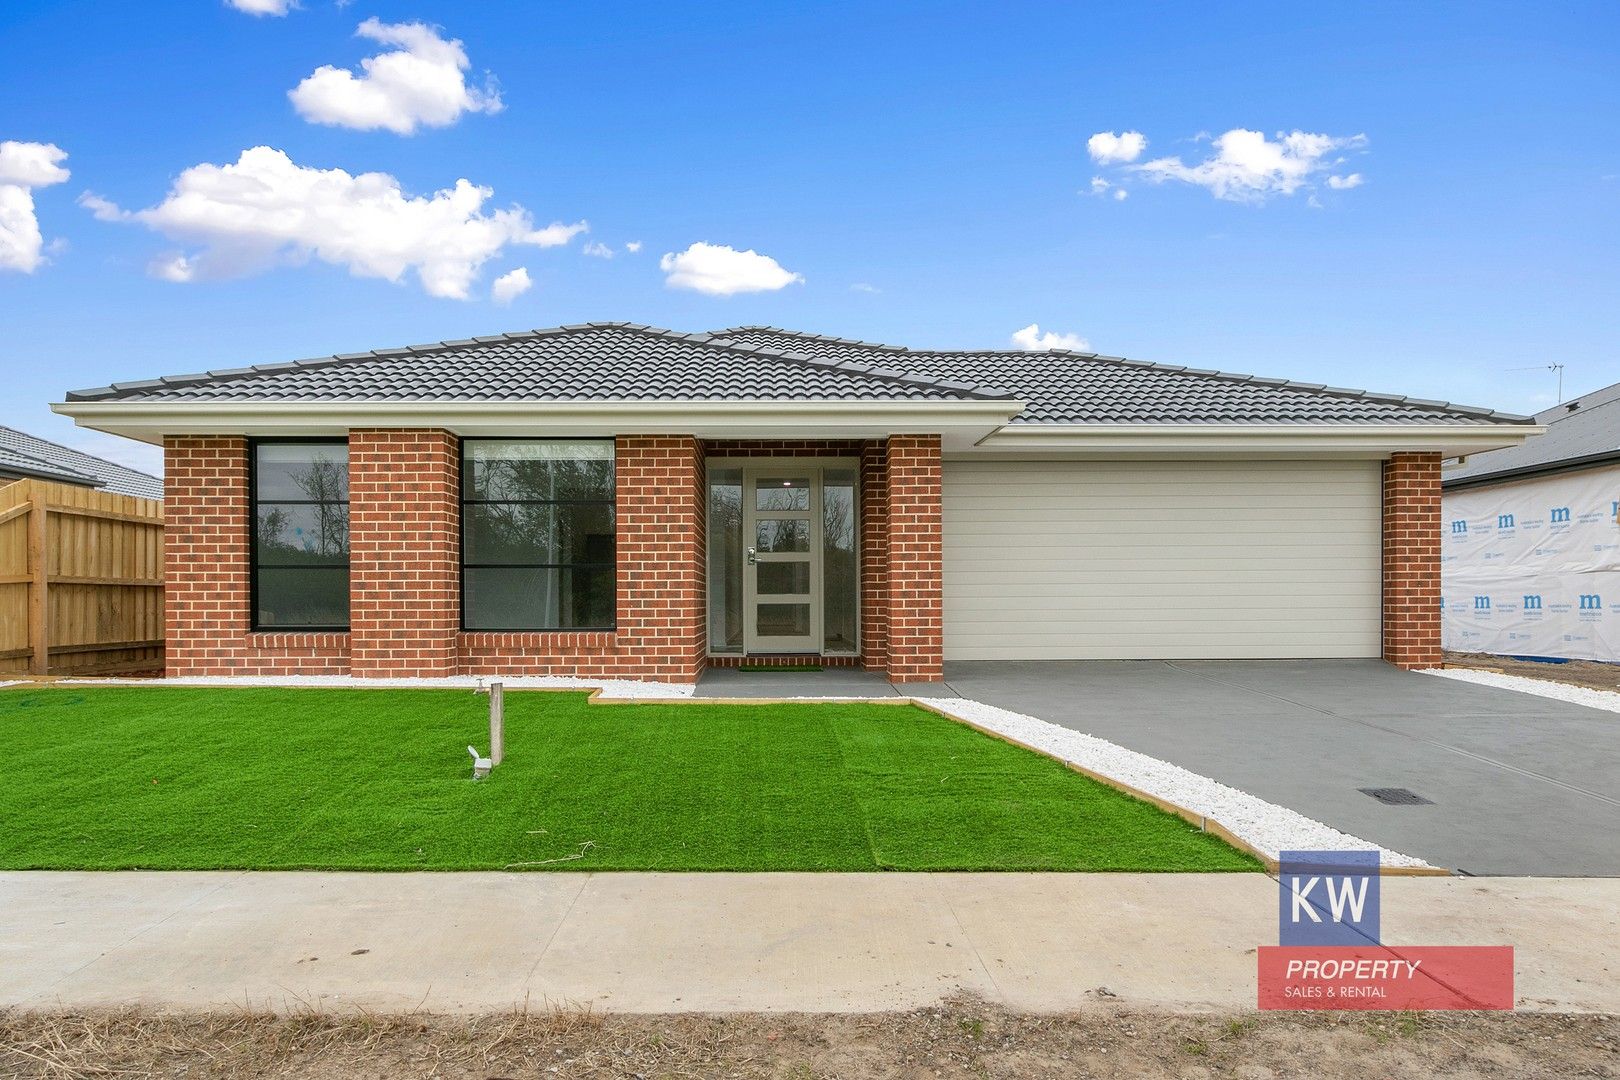 4 bedrooms House in 71 Madden St MORWELL VIC, 3840